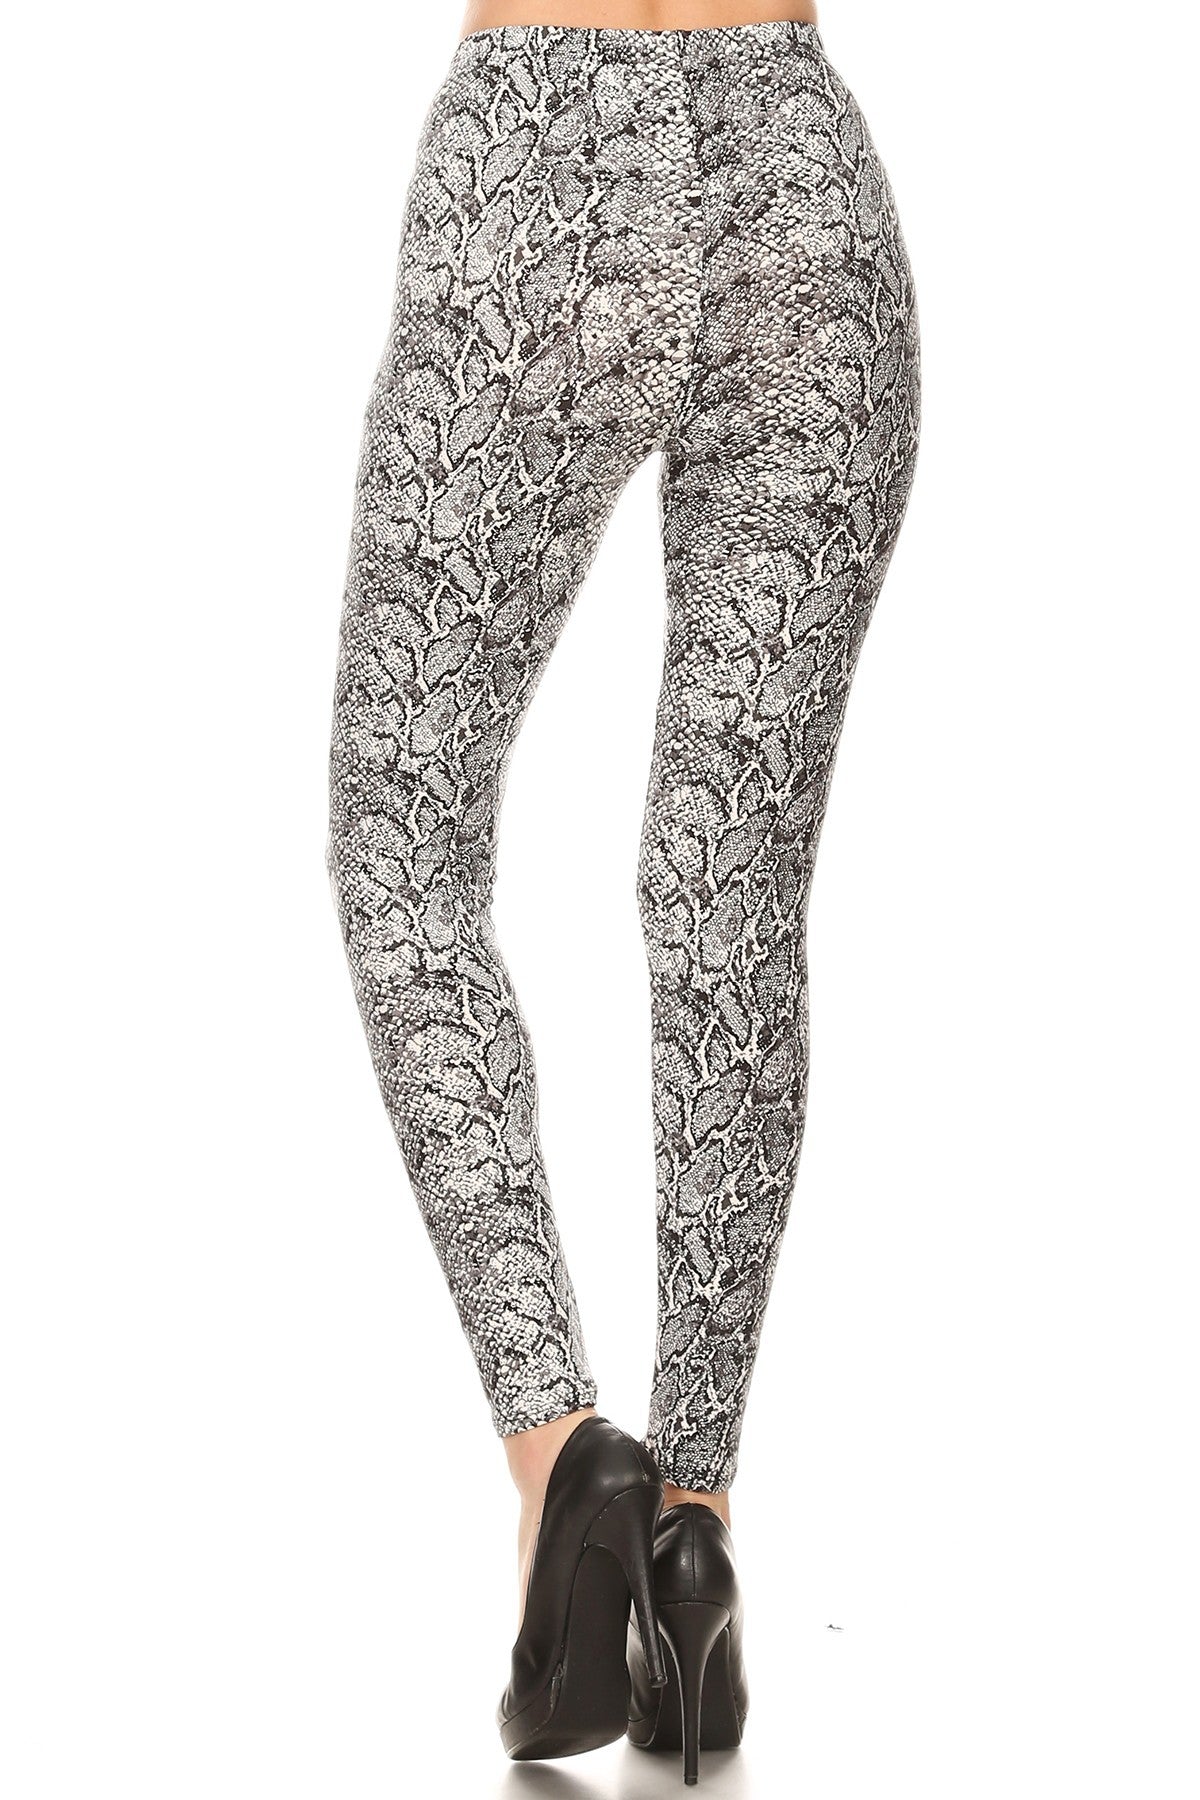 Leggings: Snakeskin Print, Full Length, High Waisted Leggings In A Fitted Style With An Elastic Waistband